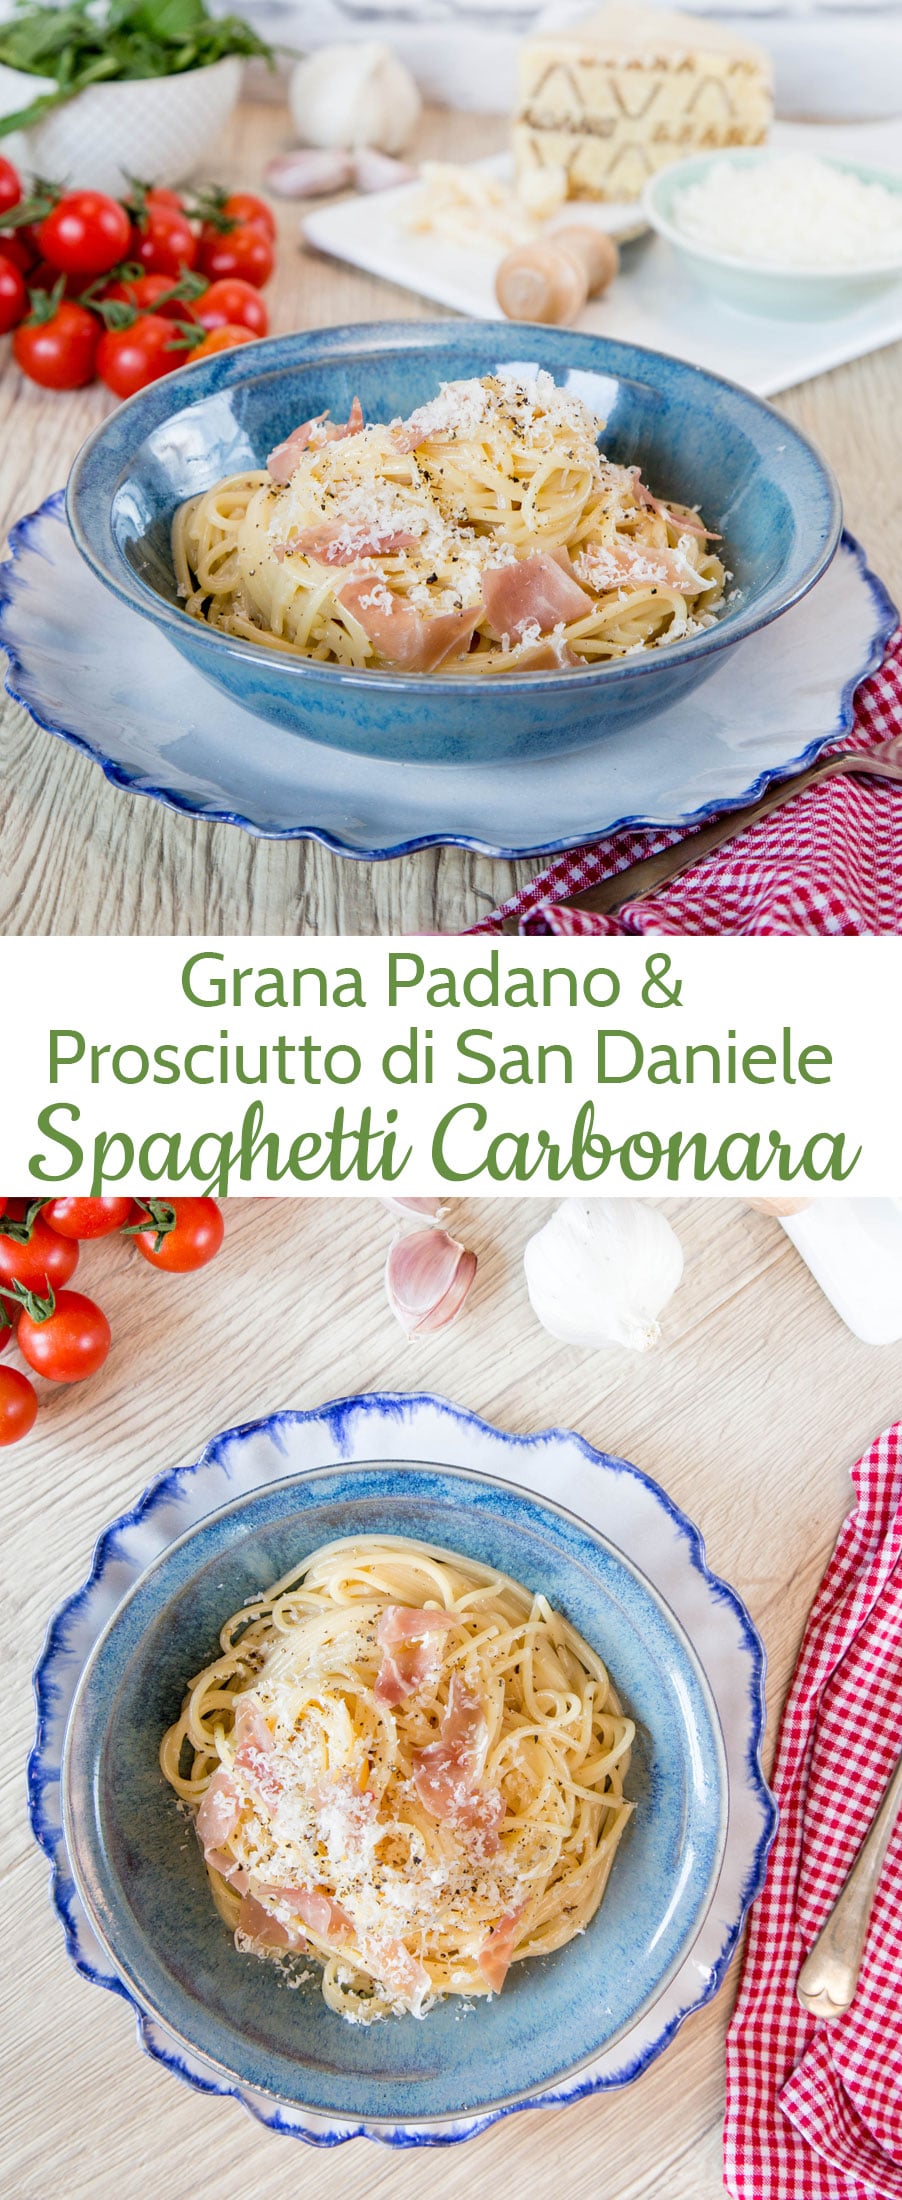 This easy twist on the everyday Italian classic of Spaghetti Carbonara is served with a generous sprinkling of Grana Padano and a scattering of Prosciutto di San Daniele